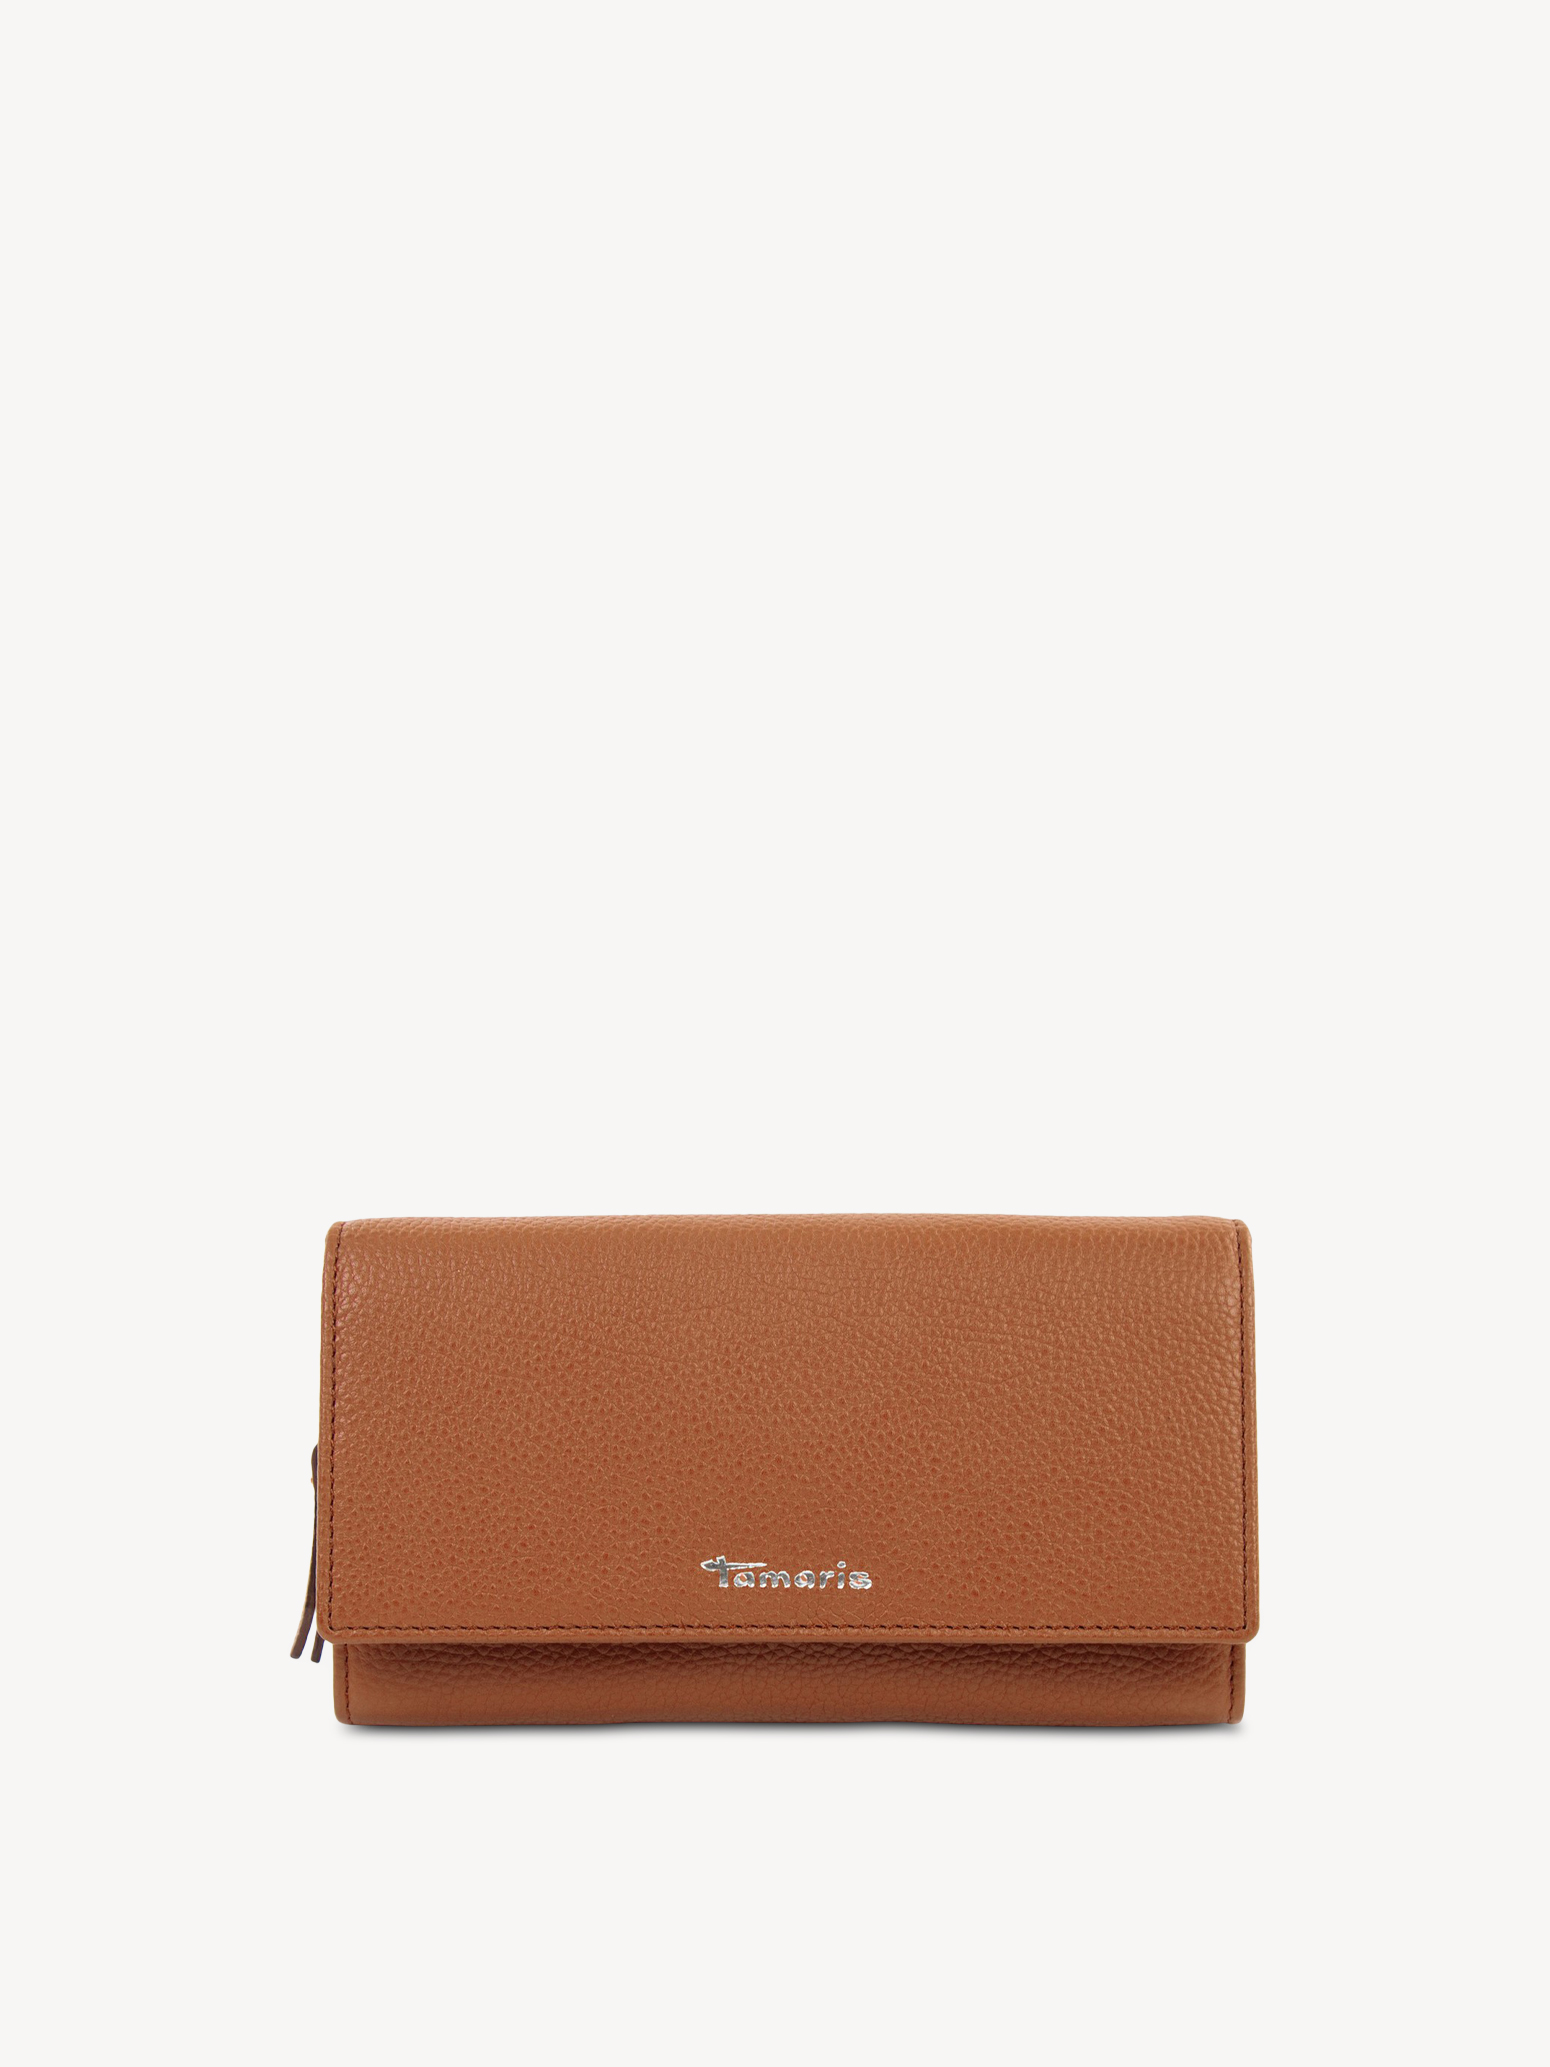 Leather Wallet - brown